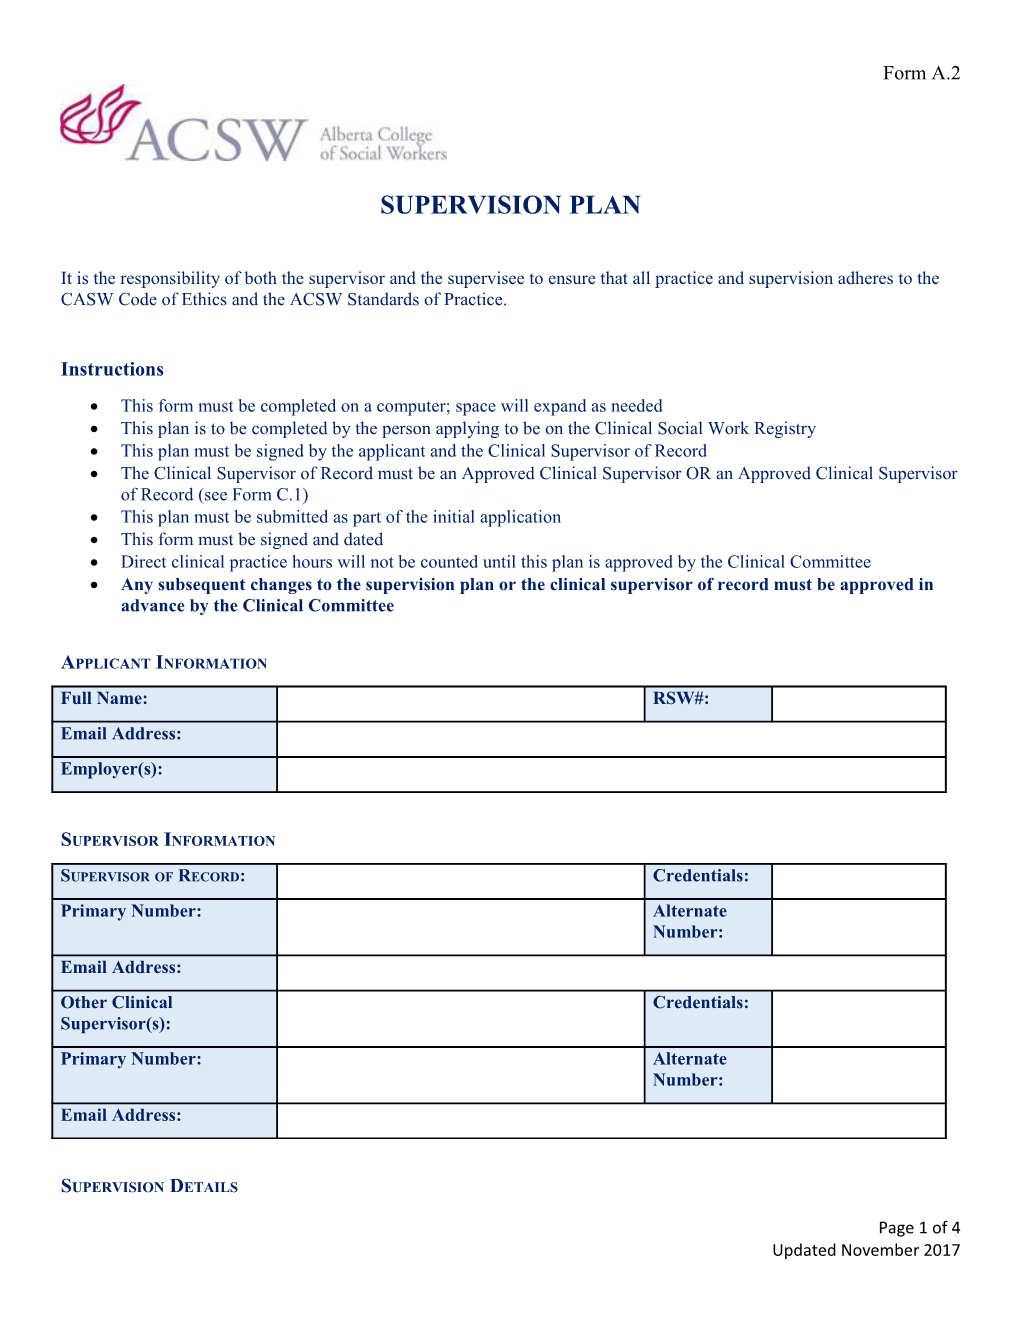 Supervision Plan